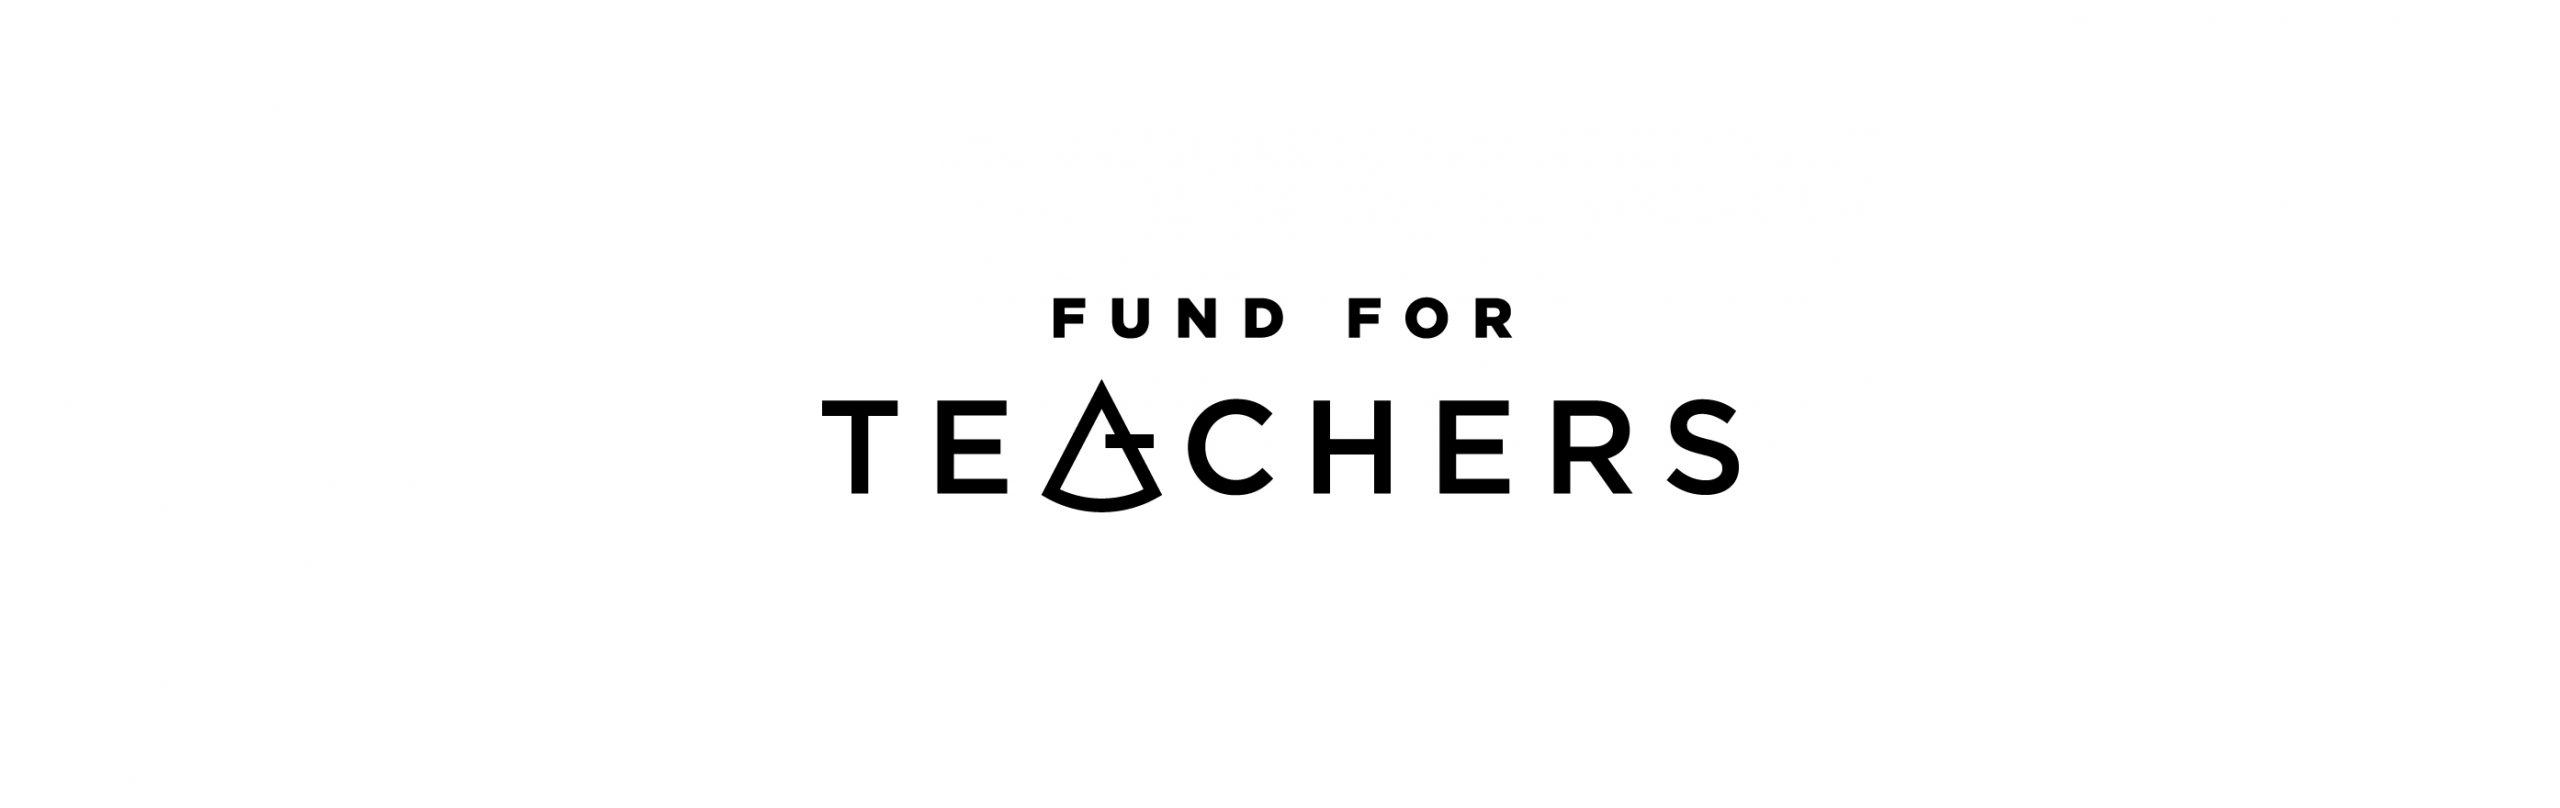 Fund for Teachers Awards More Than $132,000 in Grants to 37 Oklahoma Teachers